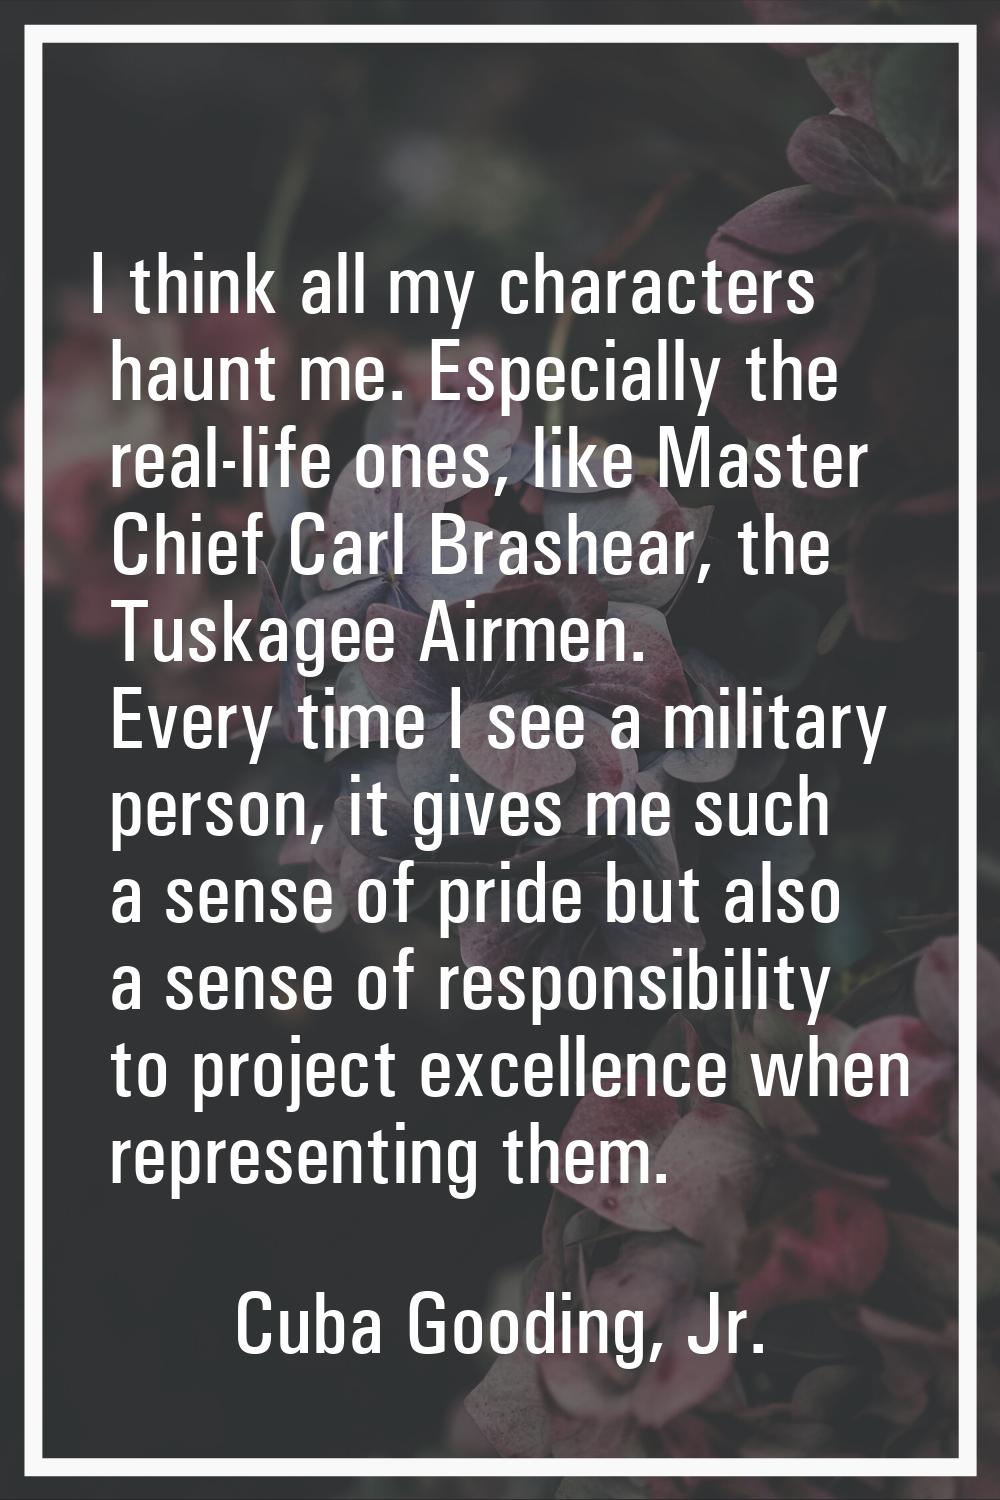 I think all my characters haunt me. Especially the real-life ones, like Master Chief Carl Brashear,